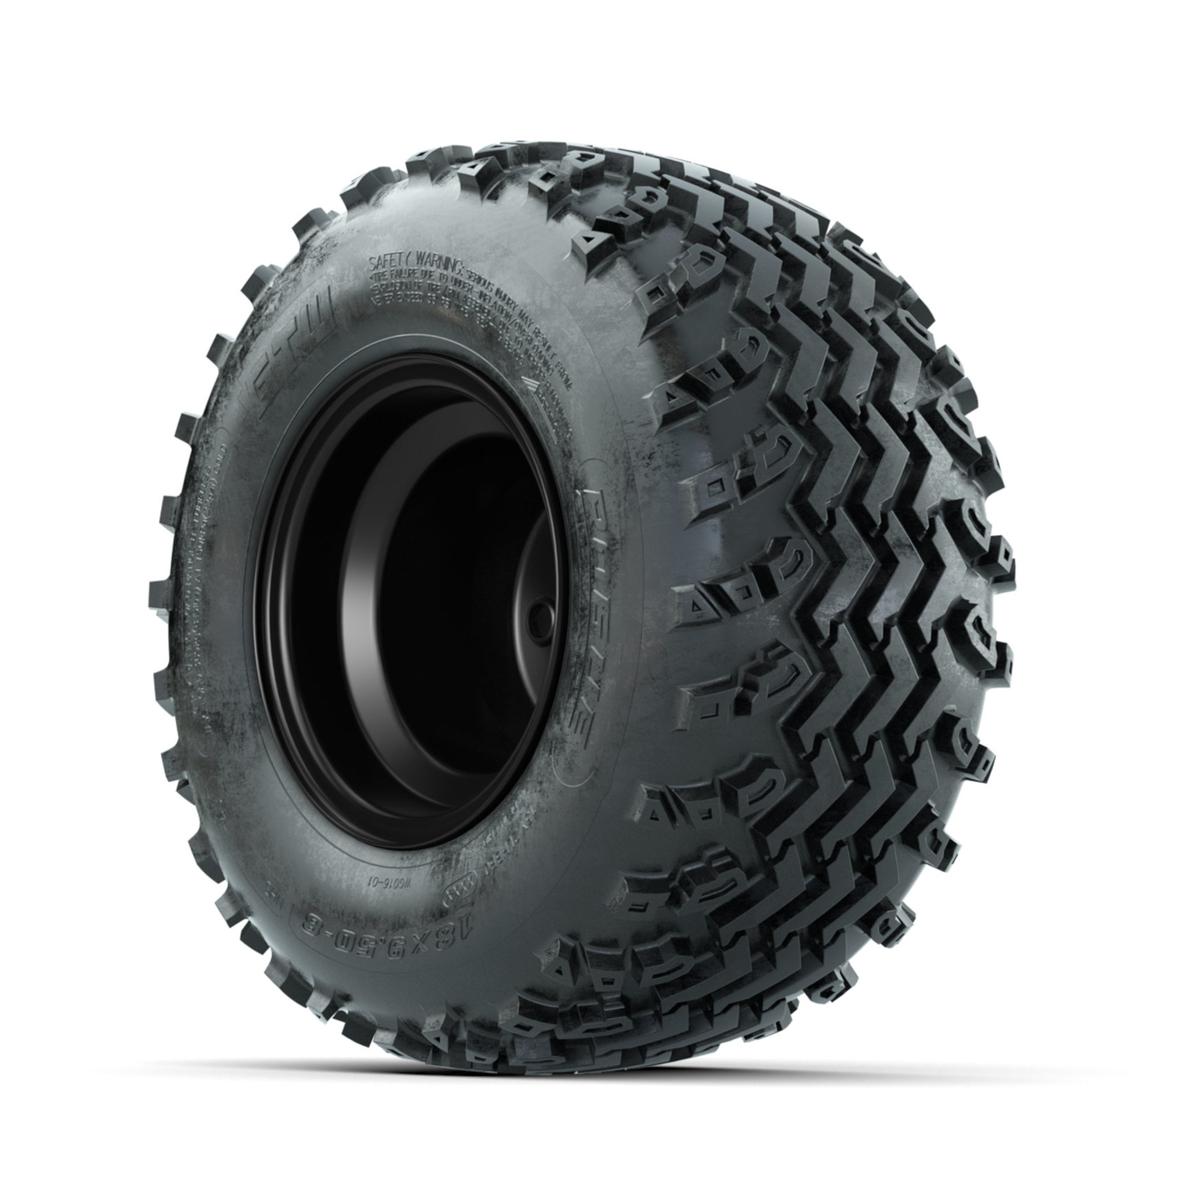 GTW Steel Matte Black 2:5 Offset 8 in Wheels with 18x9.50-8 Rogue All Terrain Tires – Full Set